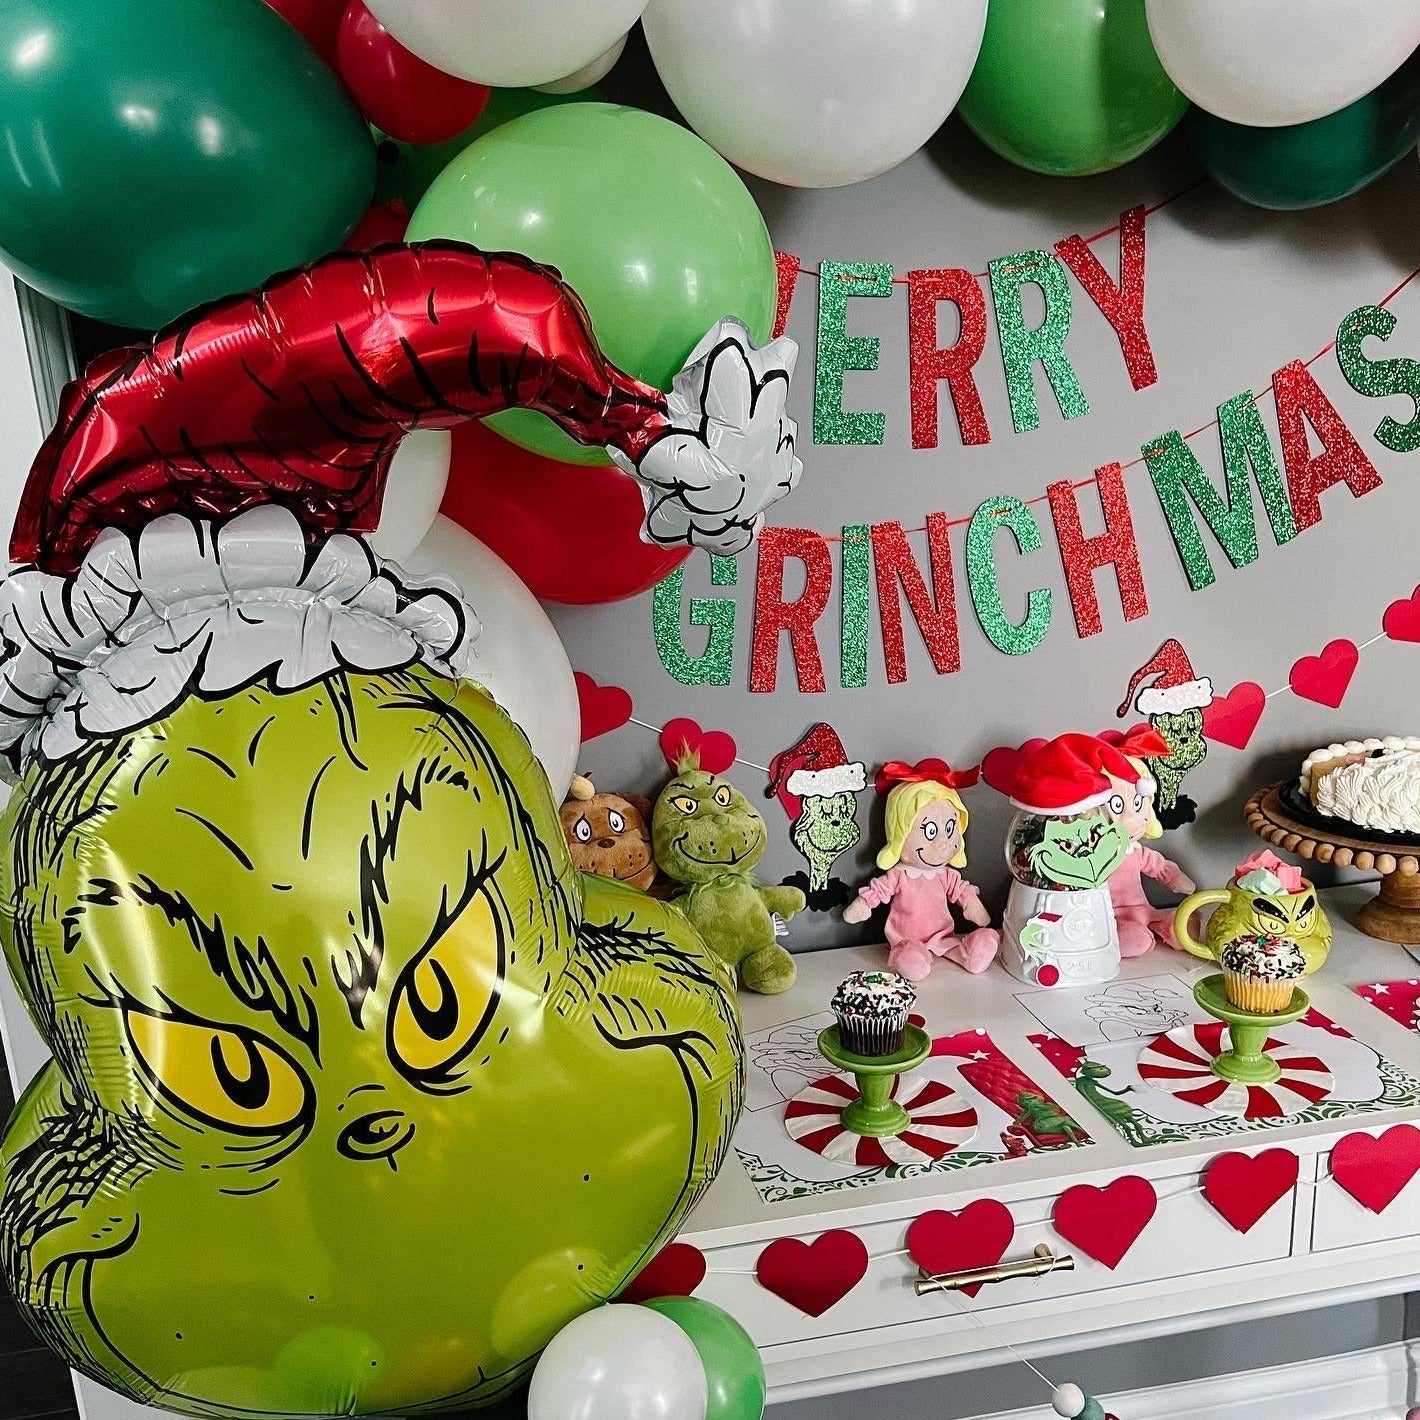 The Grinch Christmas Balloon Arch Kit - Ellie's Party Supply